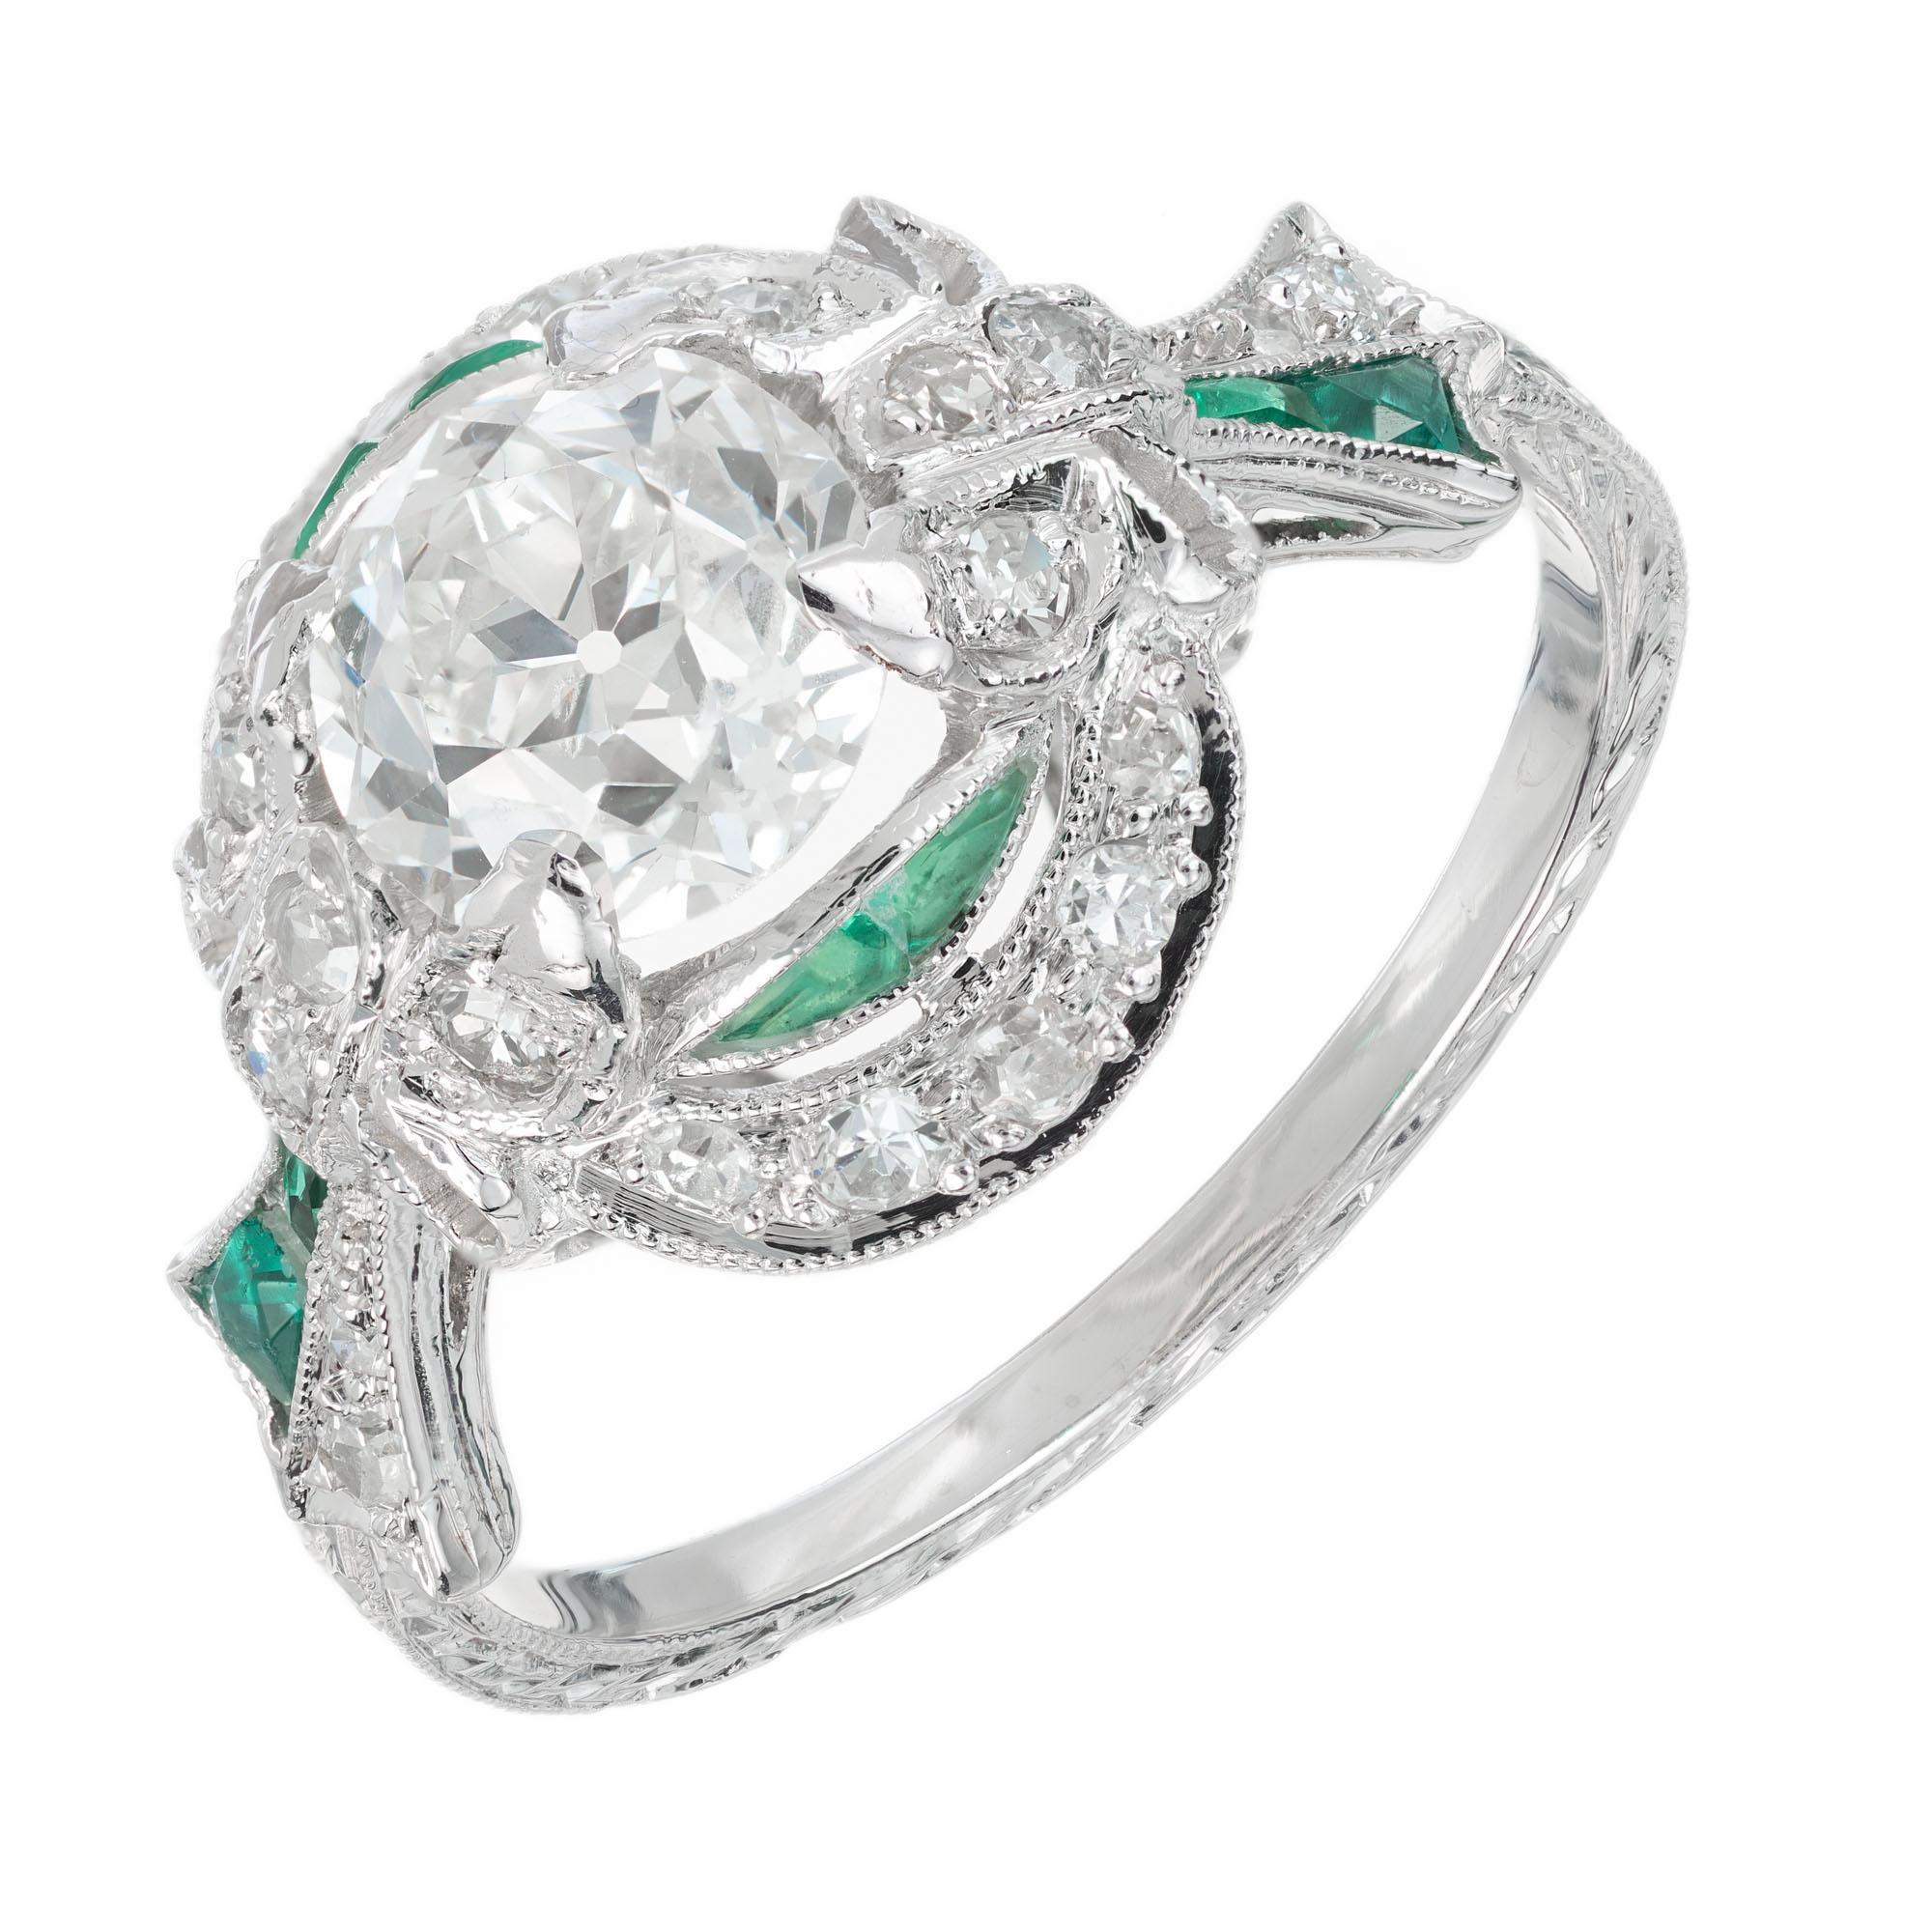 Original 1900's handmade diamond and emerald platinum engagement ring. GIA certified Old European cut center stone in a hand engraved platinum setting with 22 bead set old cut diamonds and 8 French emerald accents. The emeralds are French cut and